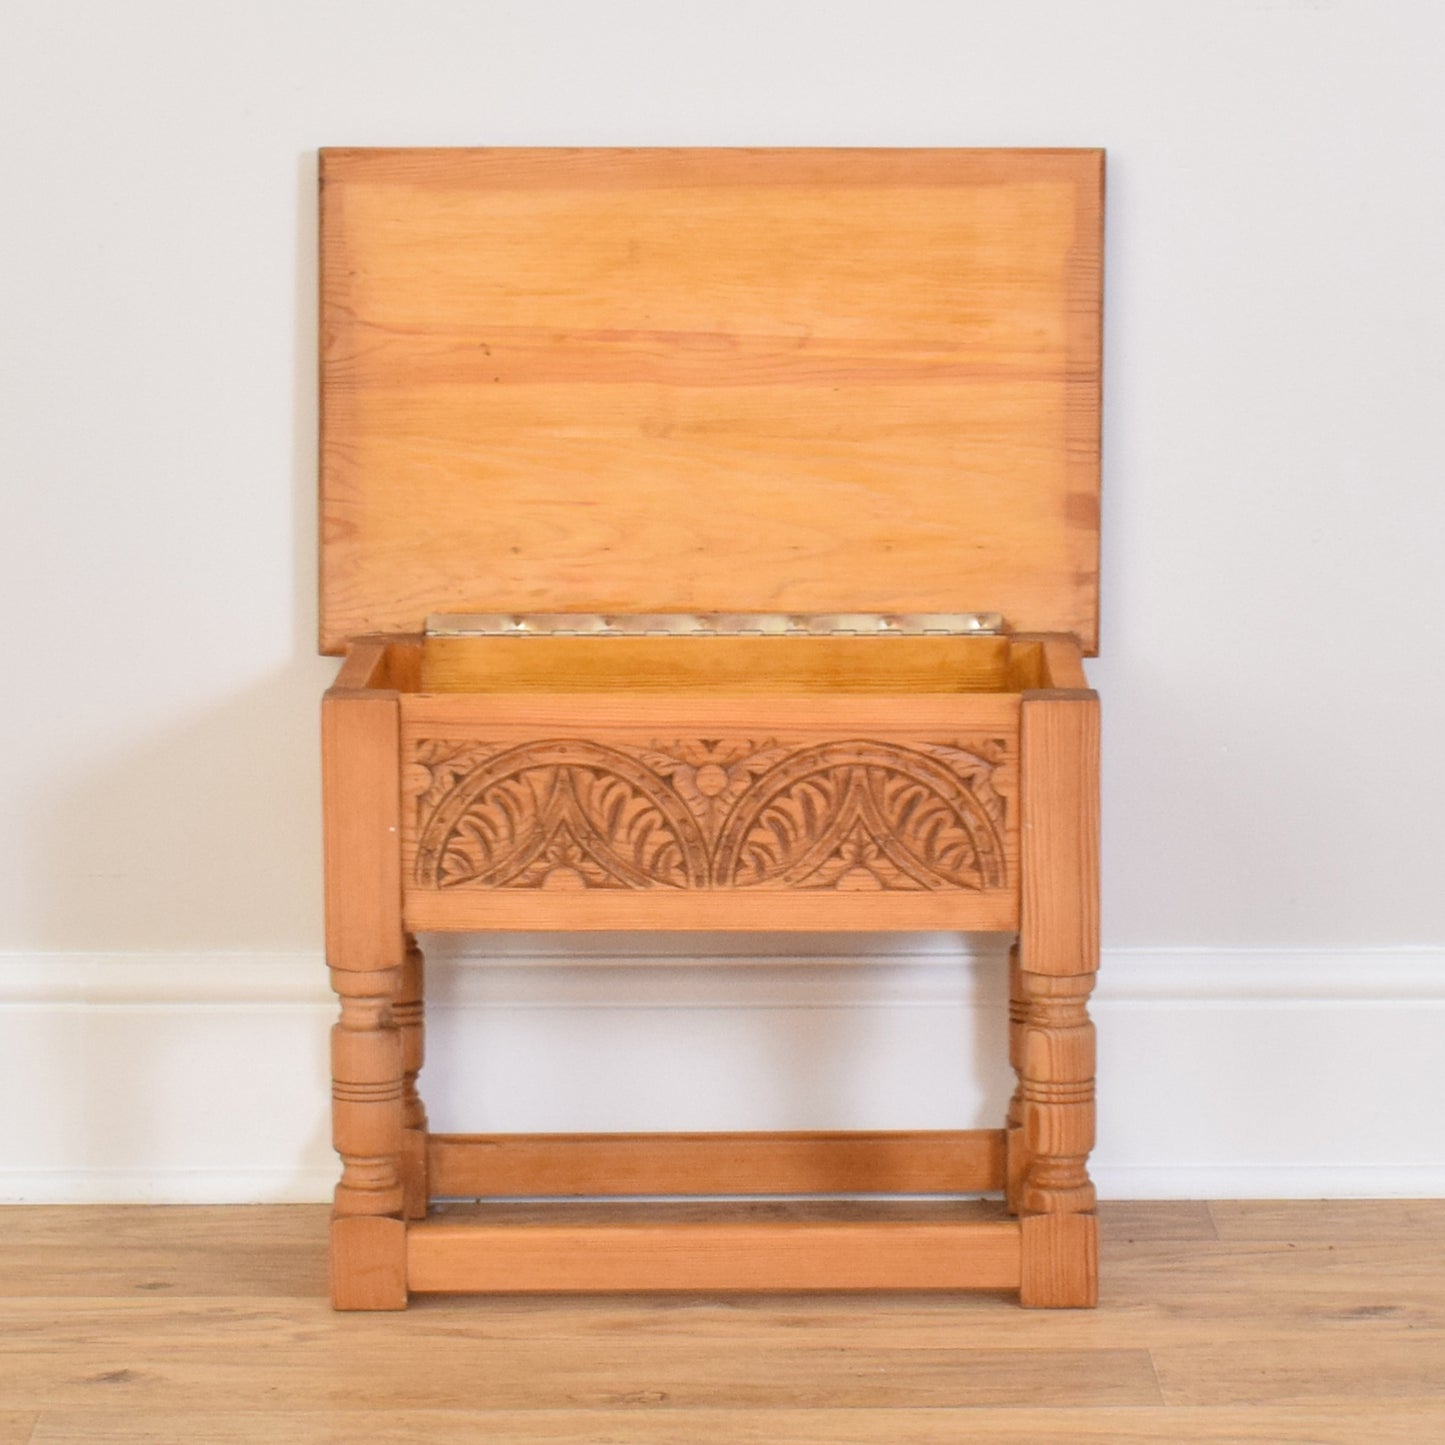 Restored Carved Pine Sewing Box